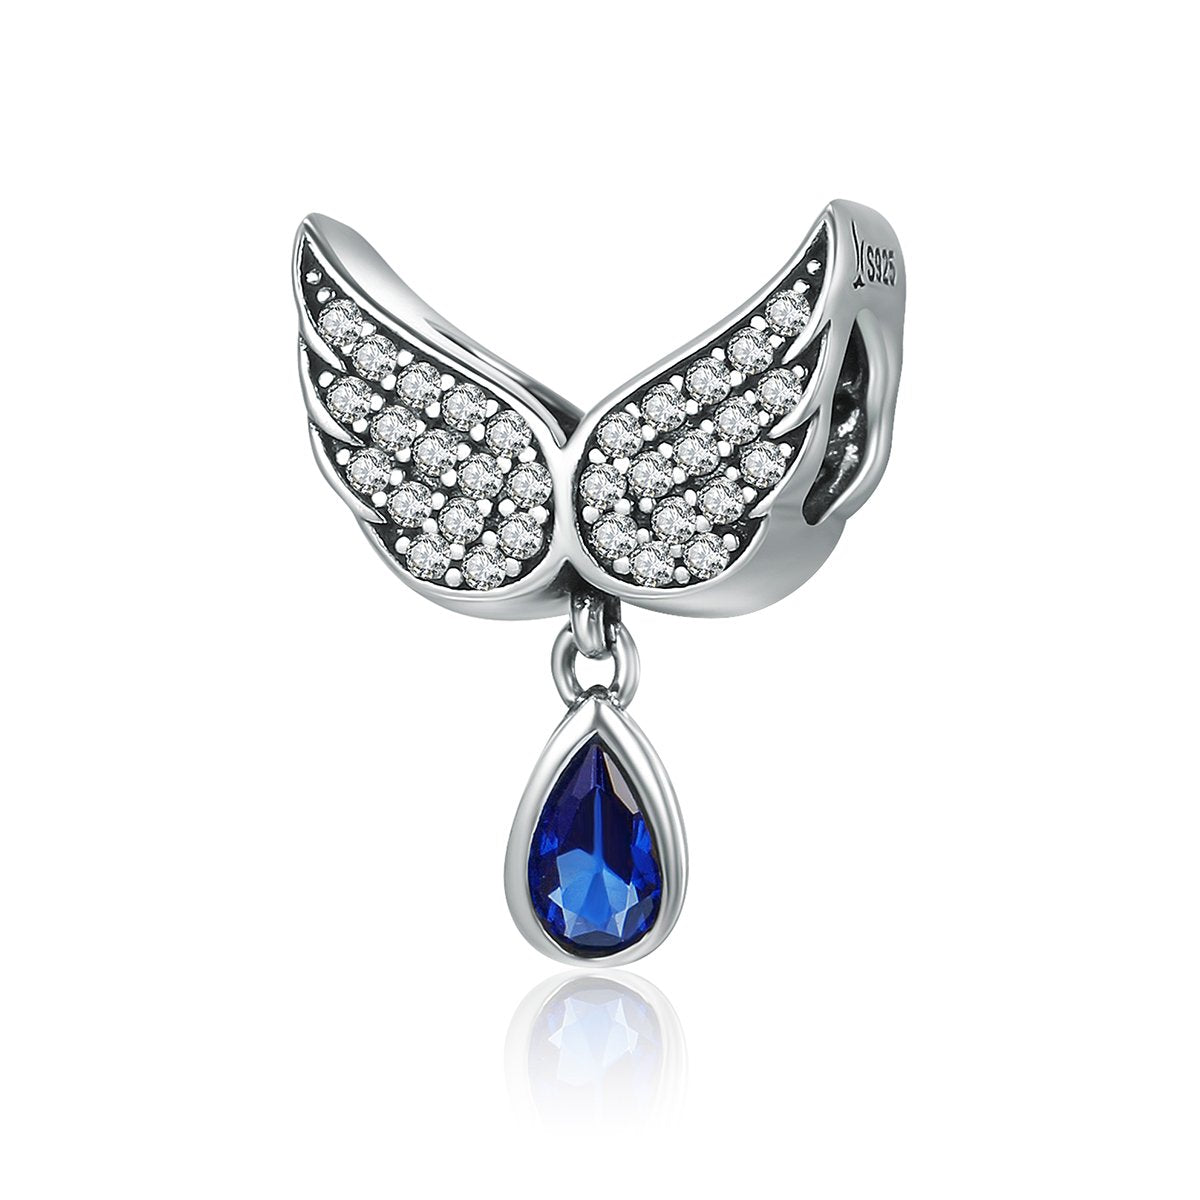 Sterling 925 silver charm the wing and blue bead pendant fits Pandora charm and European charm bracelet Xaxe.com